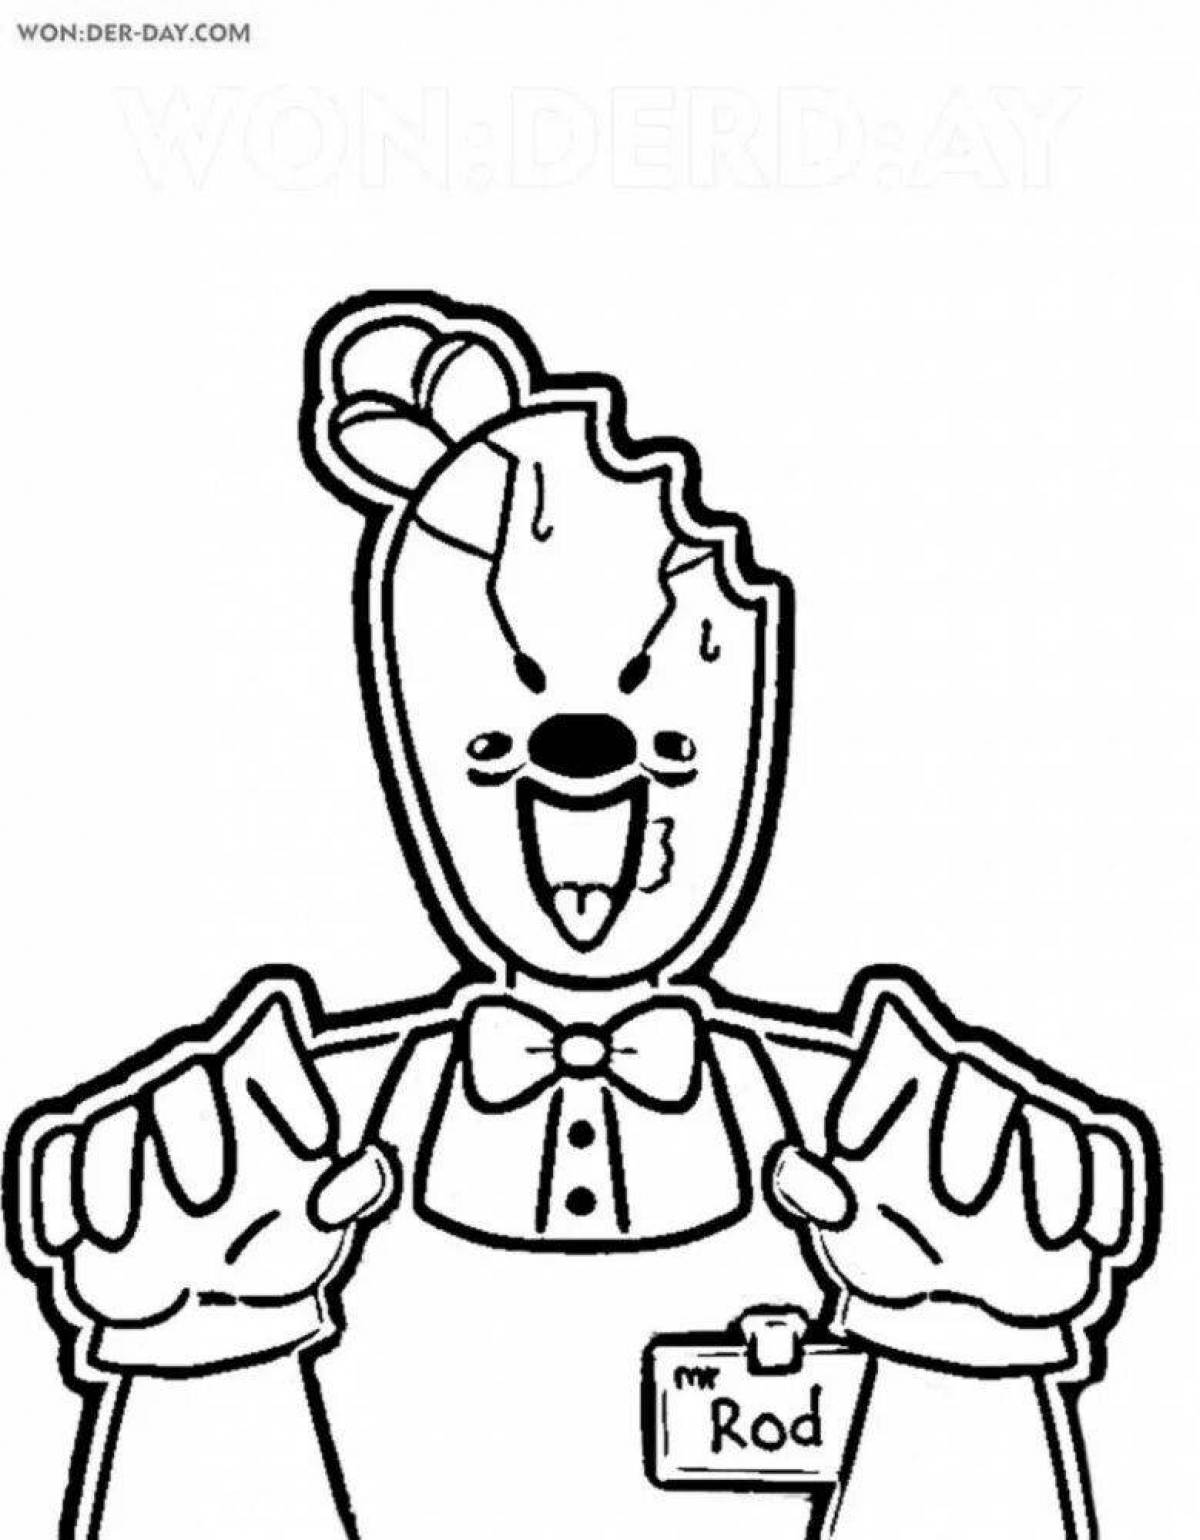 Outstanding ice cream man coloring page